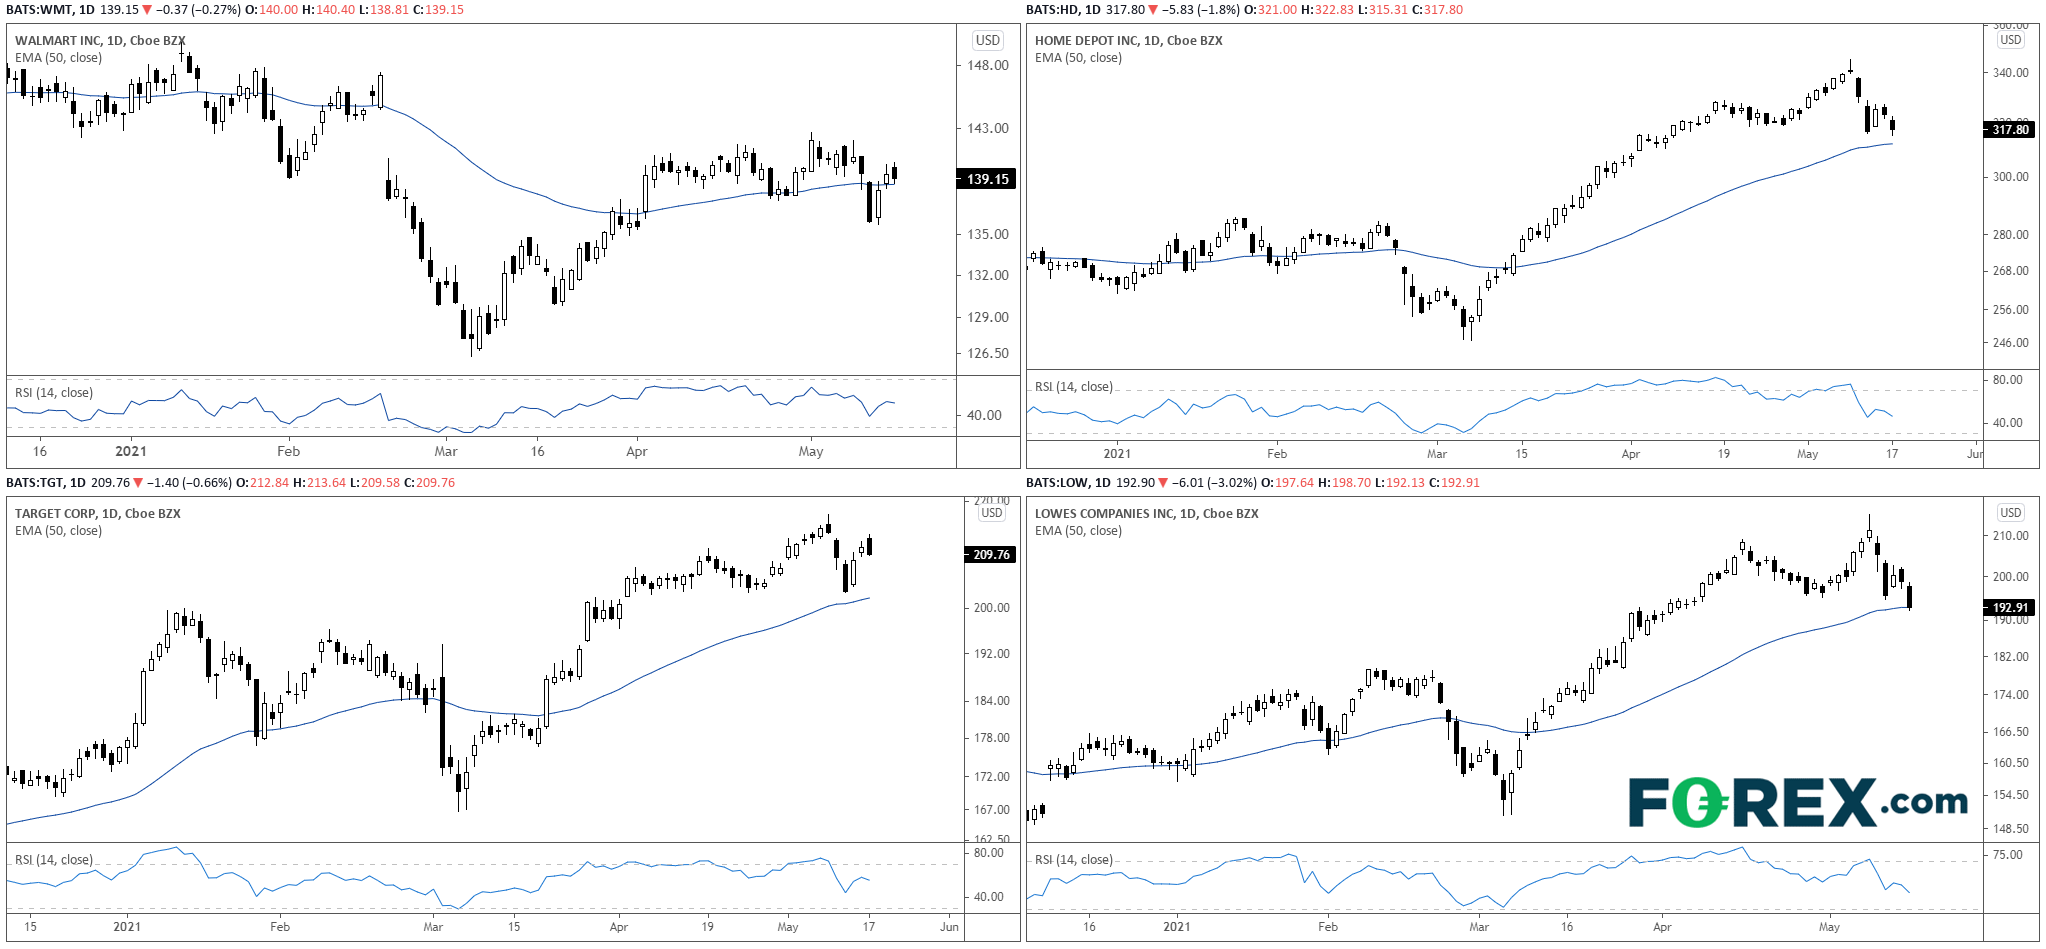 4 Retailers Daily Charts